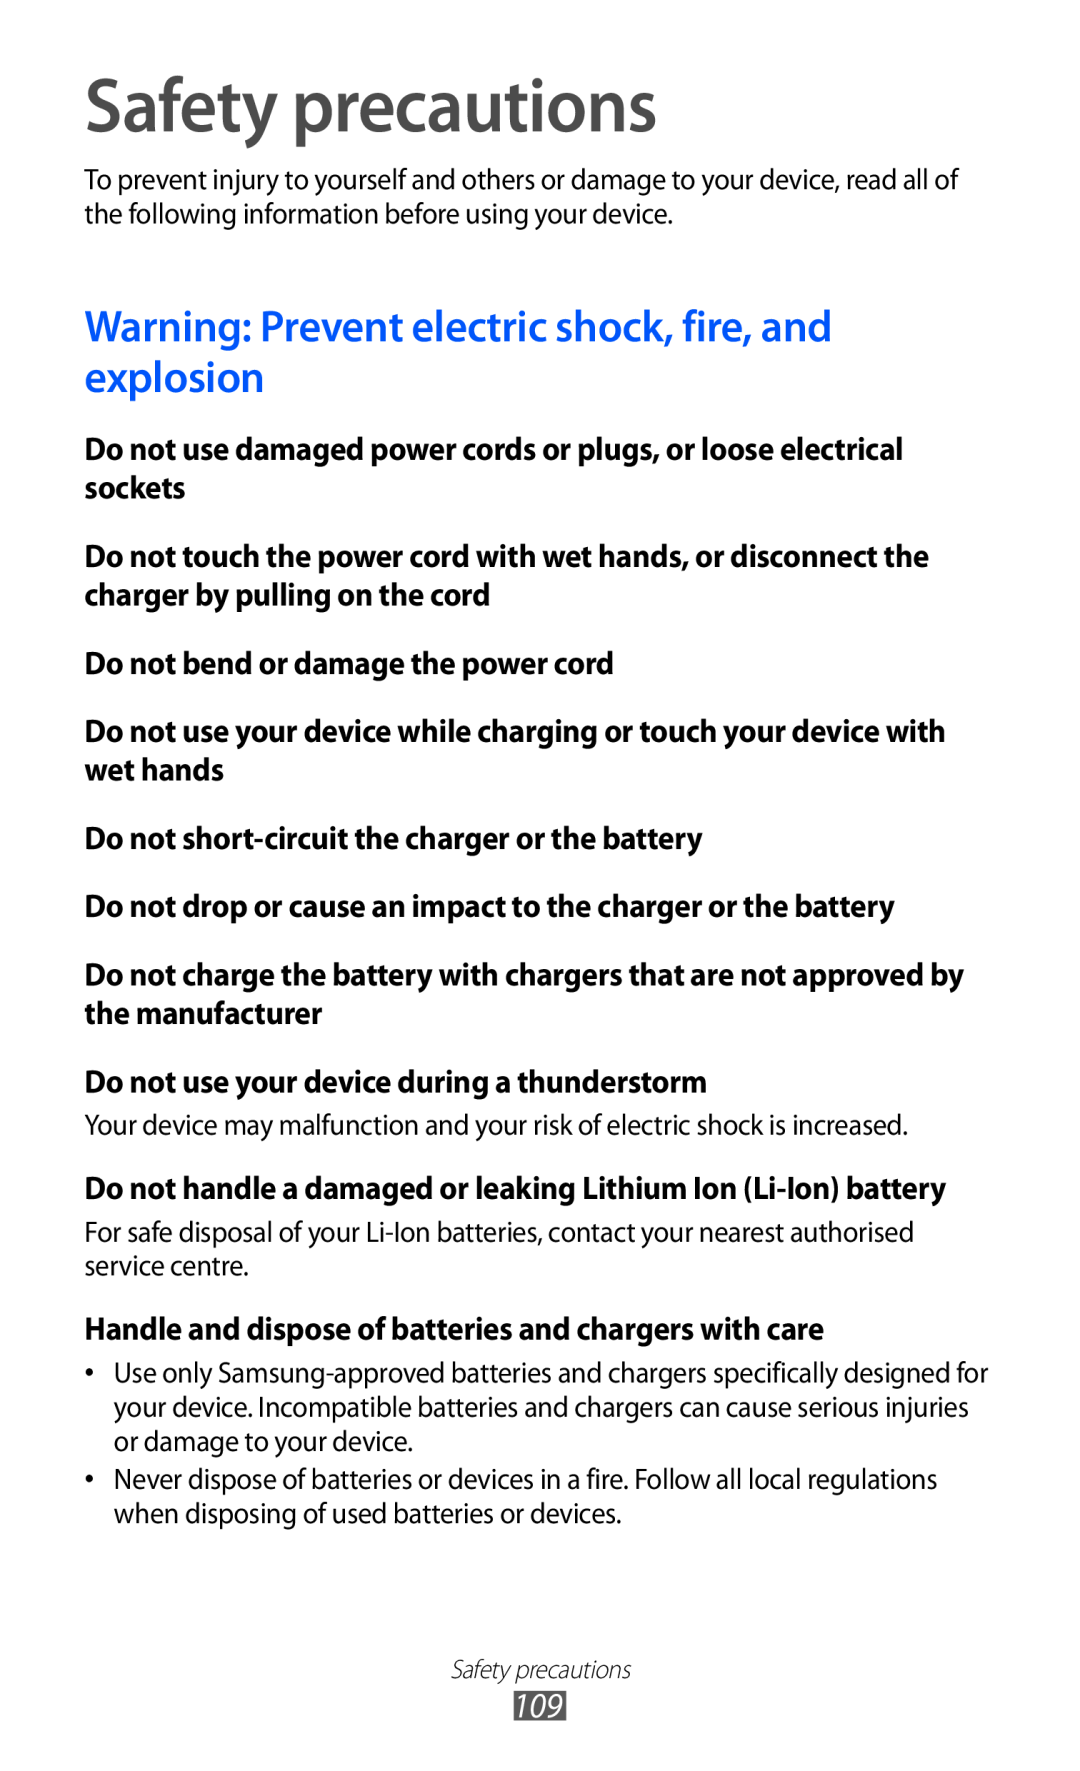 Samsung GT-P7310FKASER, GT-P7310FKEXEF manual Safety precautions, Warning Prevent electric shock, fire, and explosion 